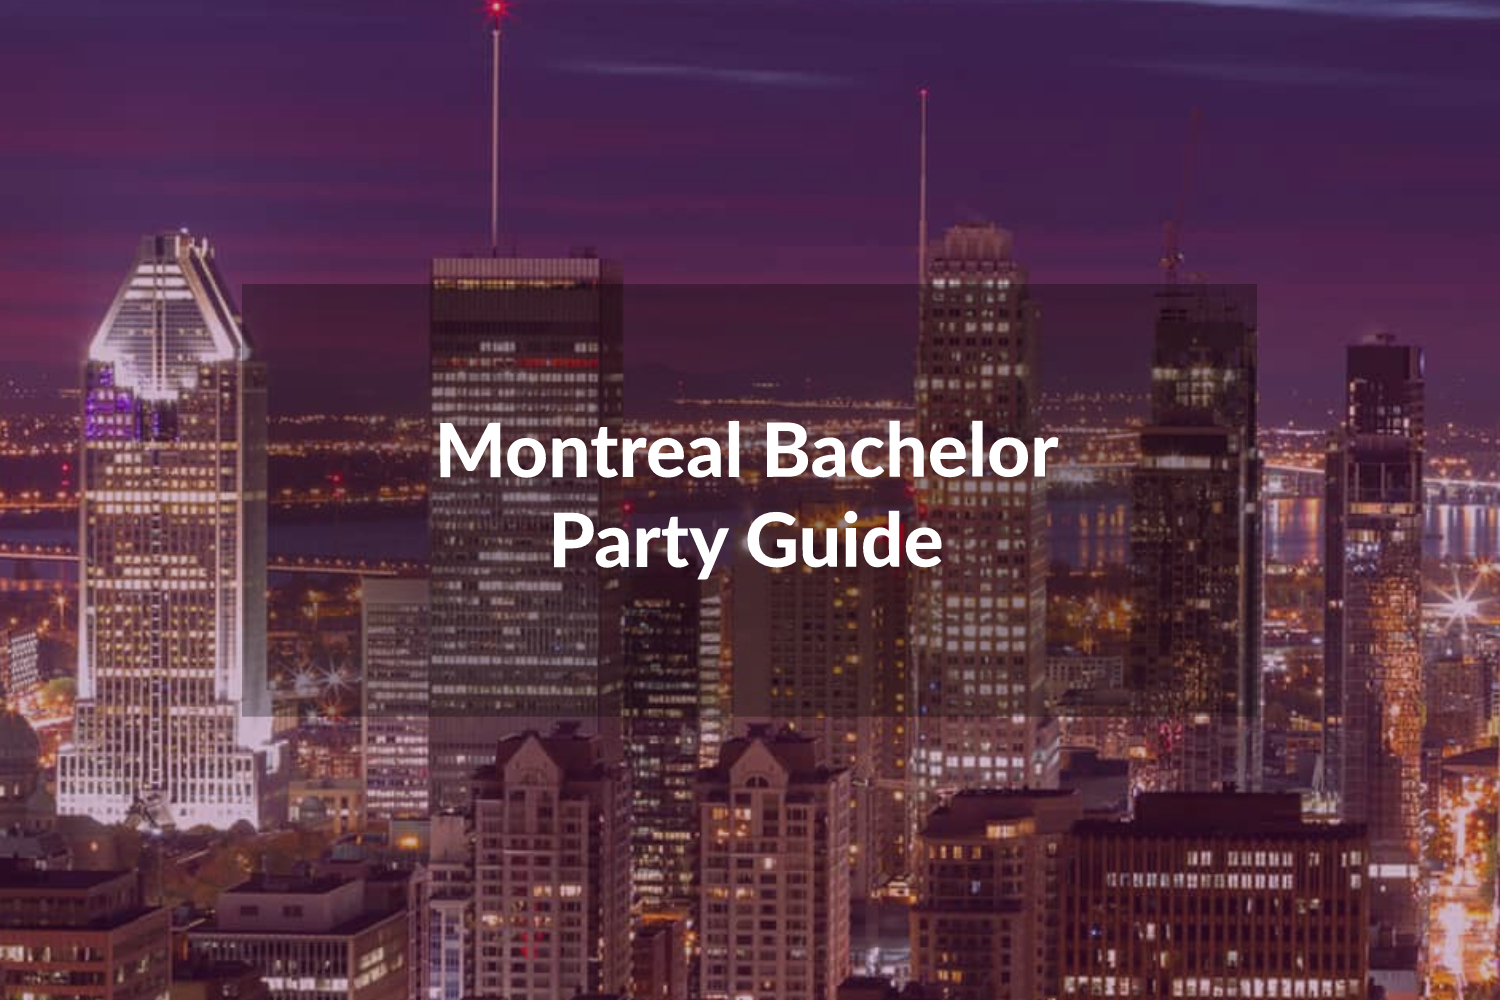 Montreal Bachelor Party Guide